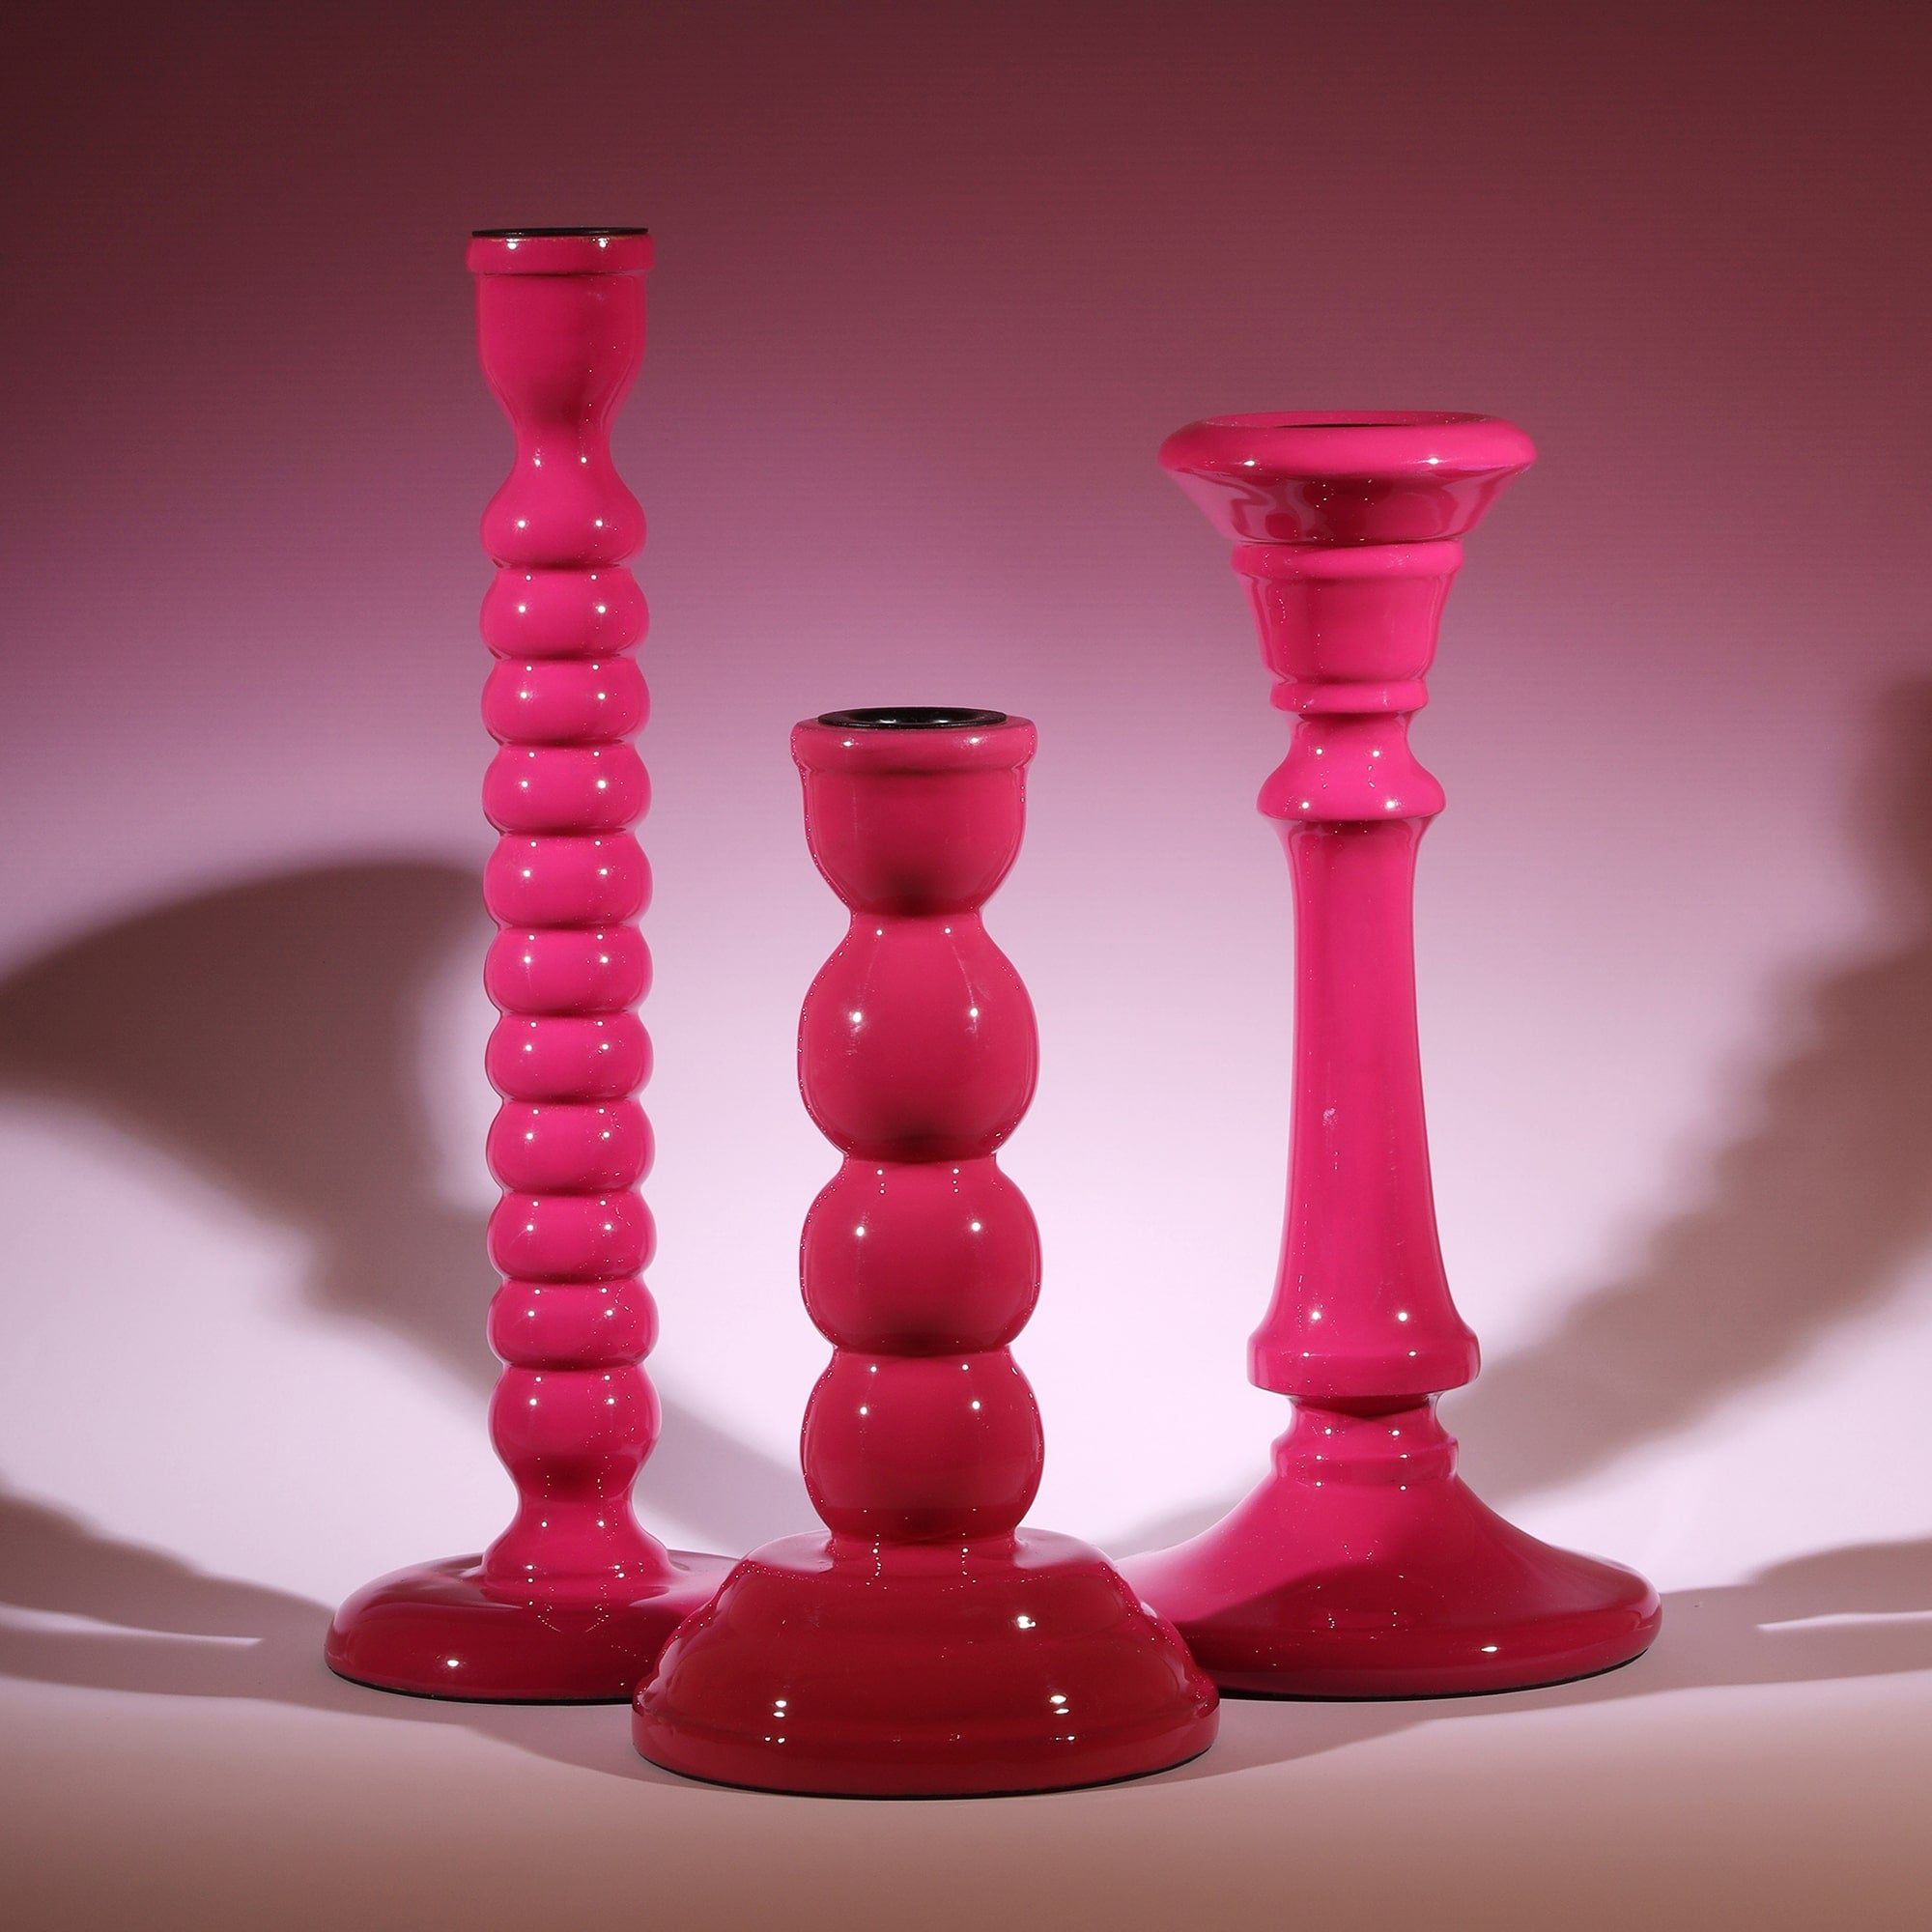 Fuschia Candle holder collection in Breeze,Tidal and Drift.